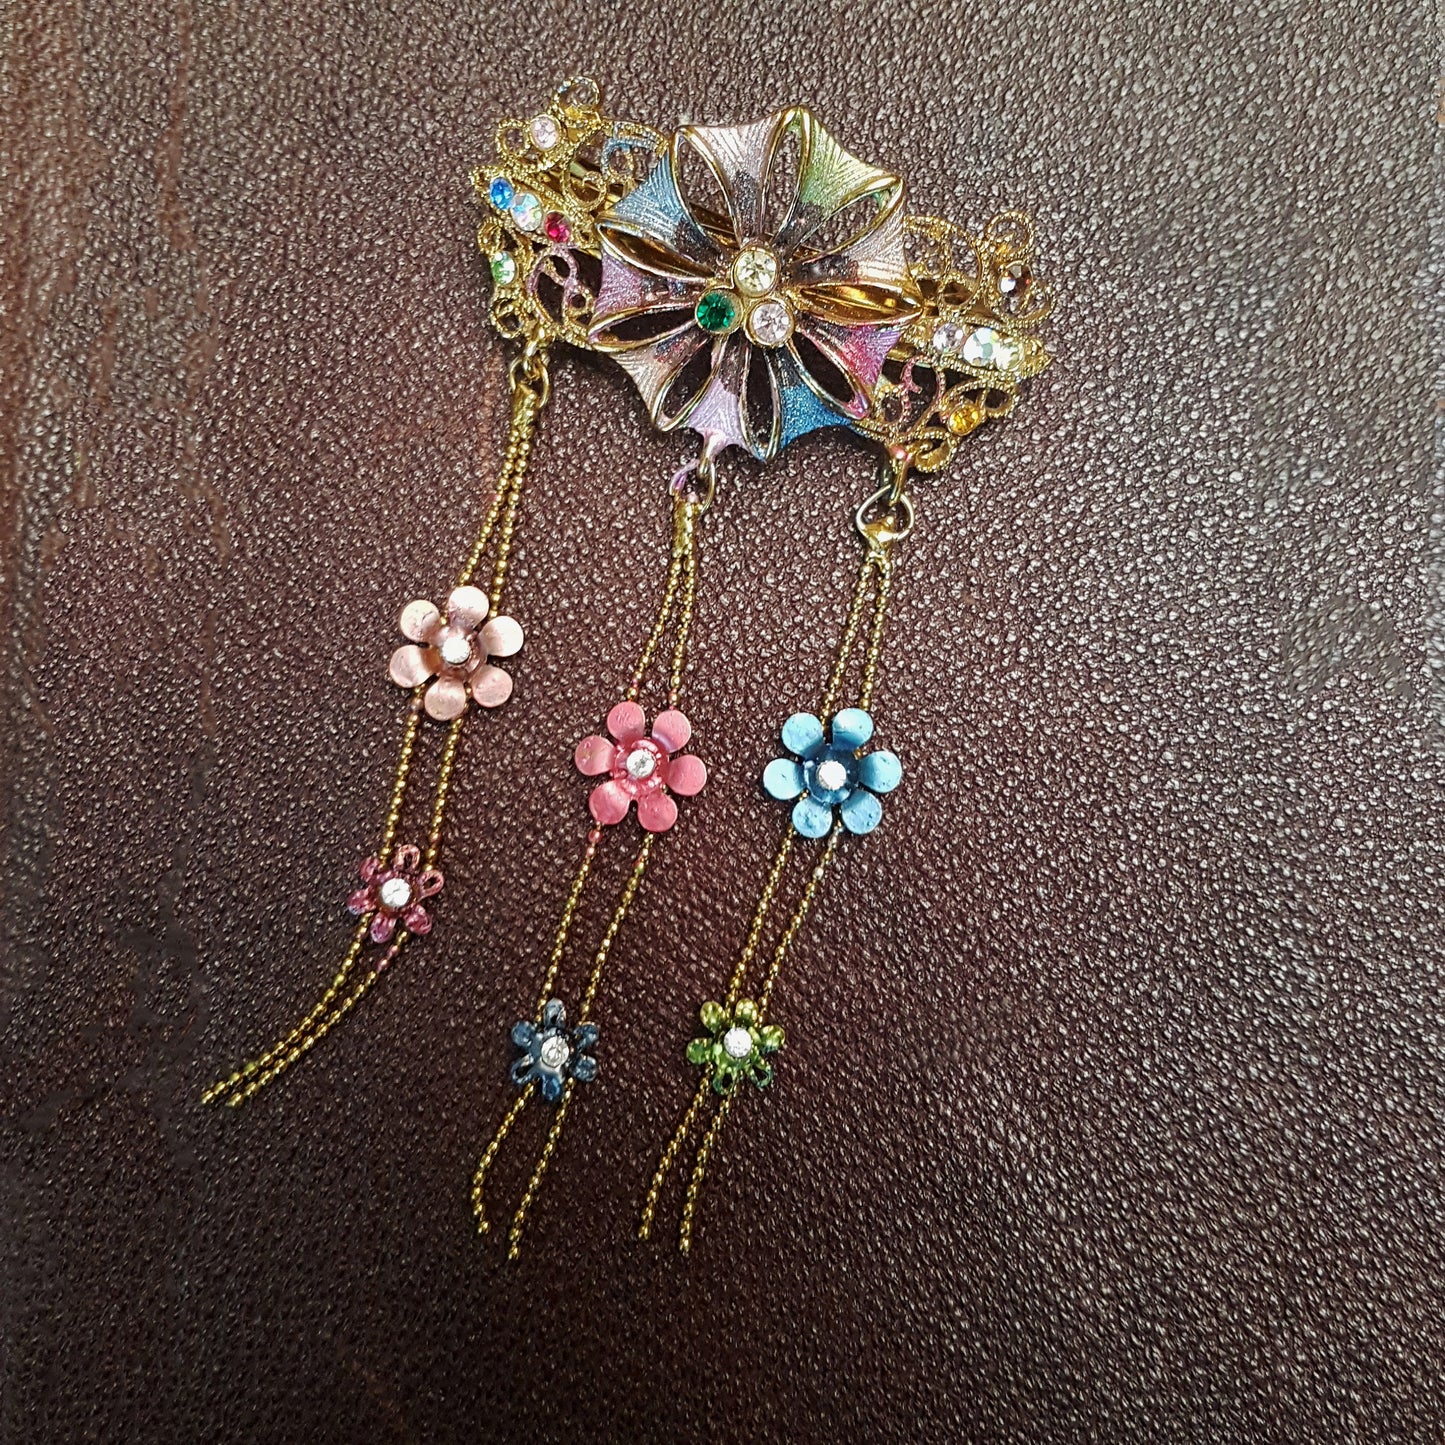 Vintage hairclip barette in a  medieval flower design. Hair jewelry with rhinestones in soft rose and blue tones.  Gold metal details.